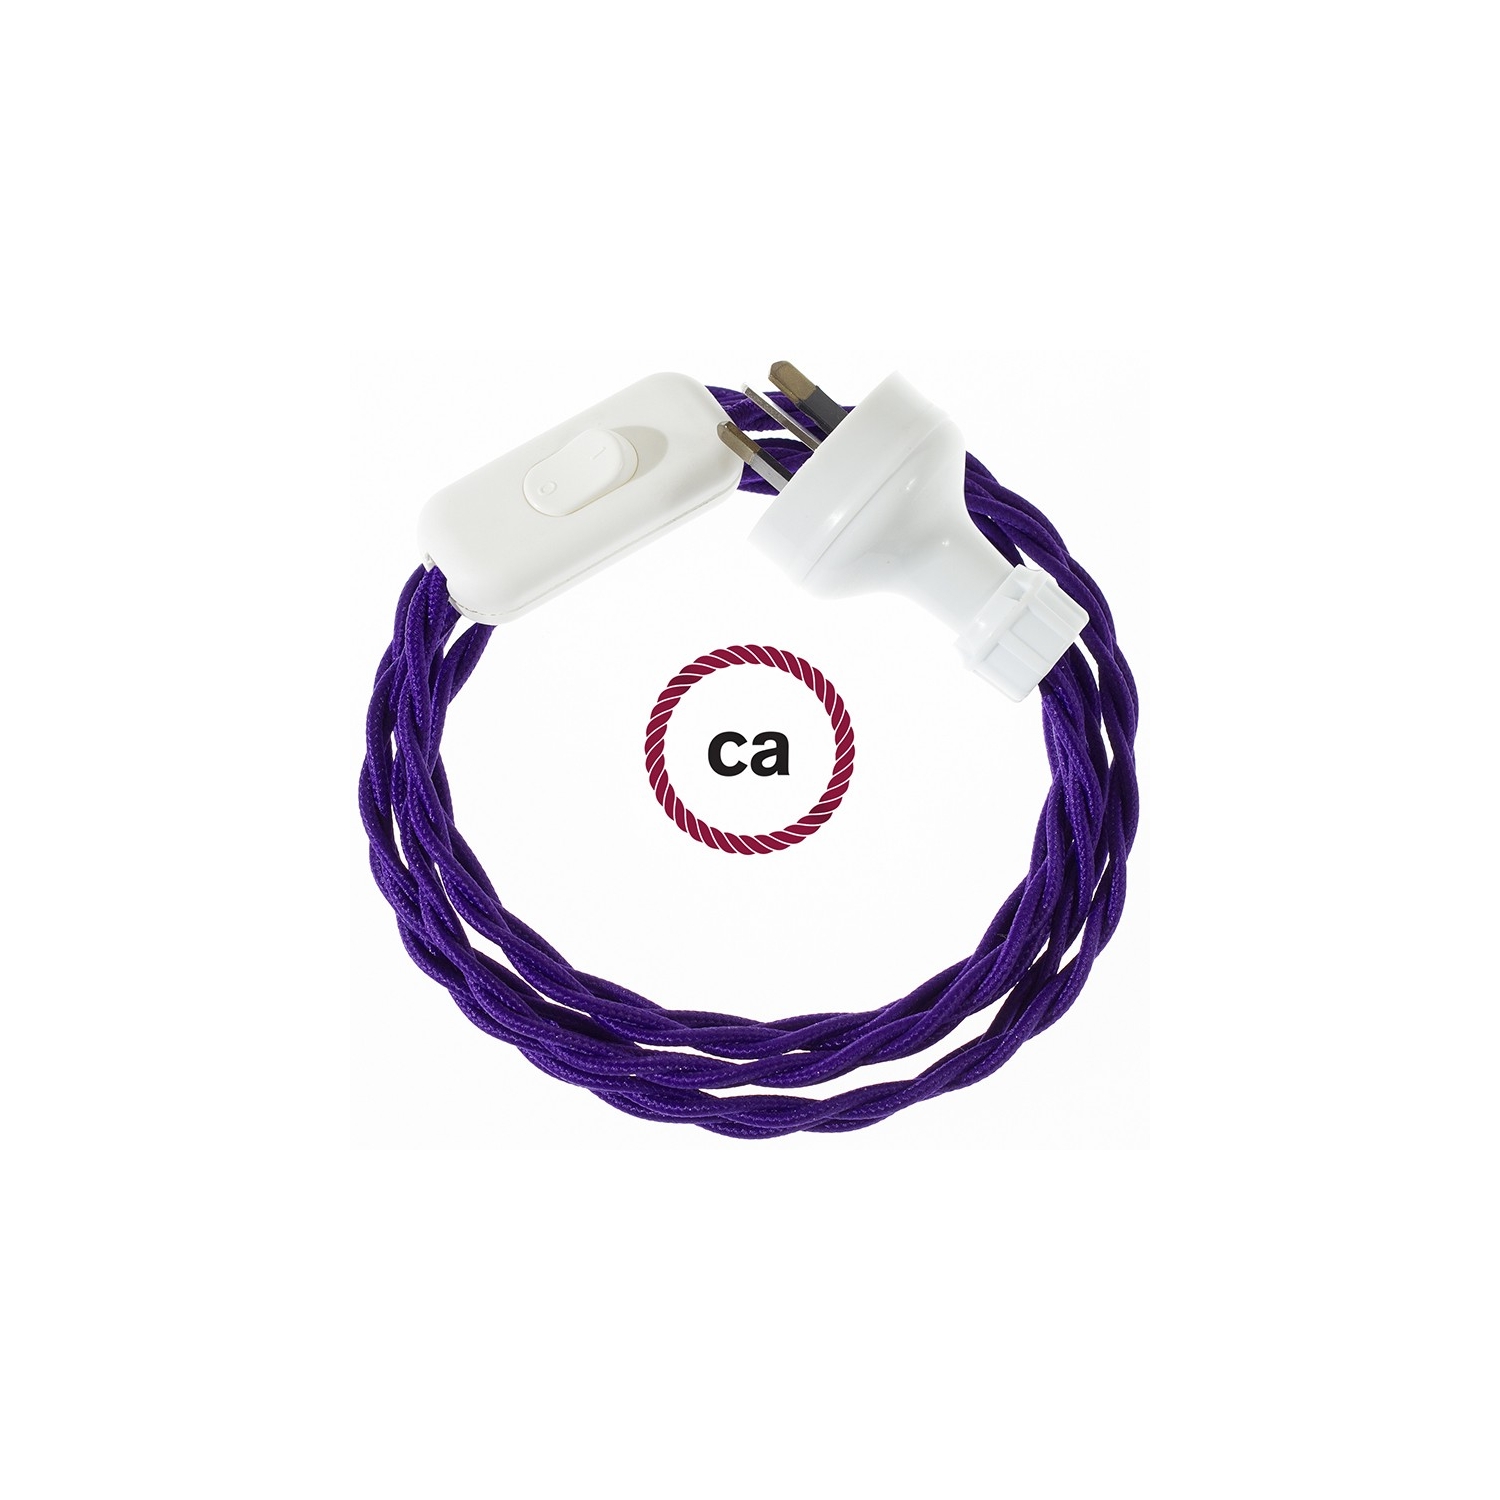 Wiring Violet Rayon textile cable TM14 - 1.80 mt